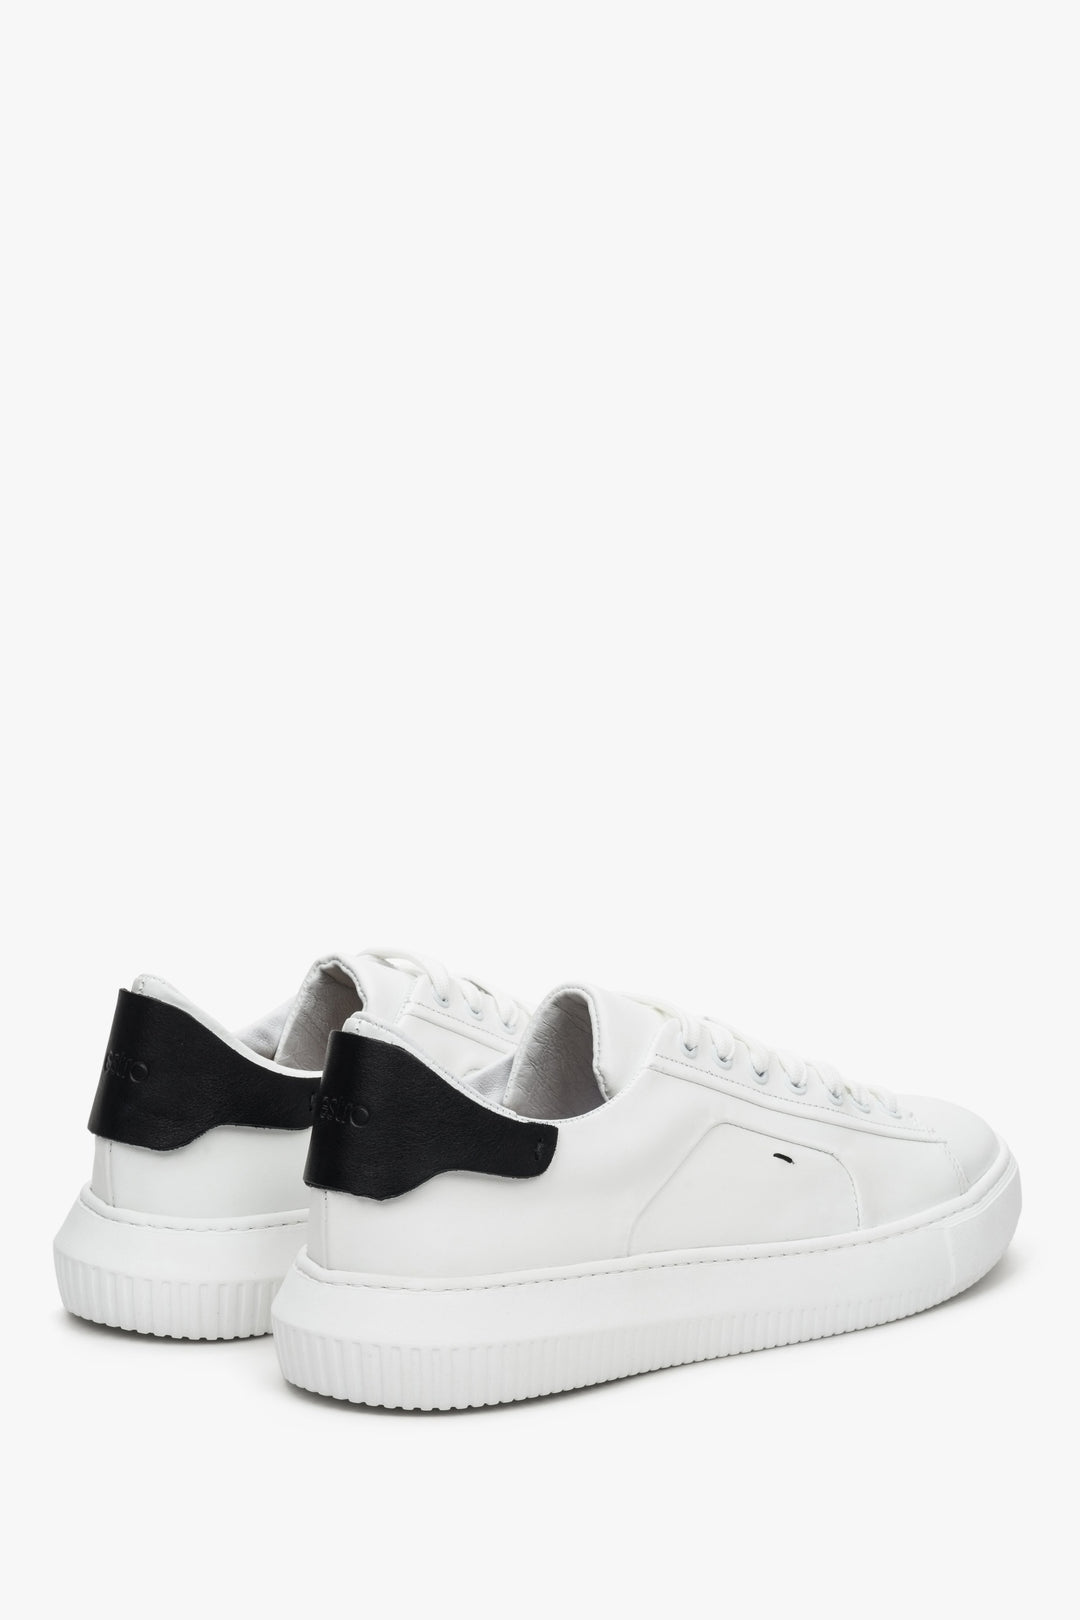 Men's white leather sneakers for spring and fall - prezentation of the shoe side and heel counter.